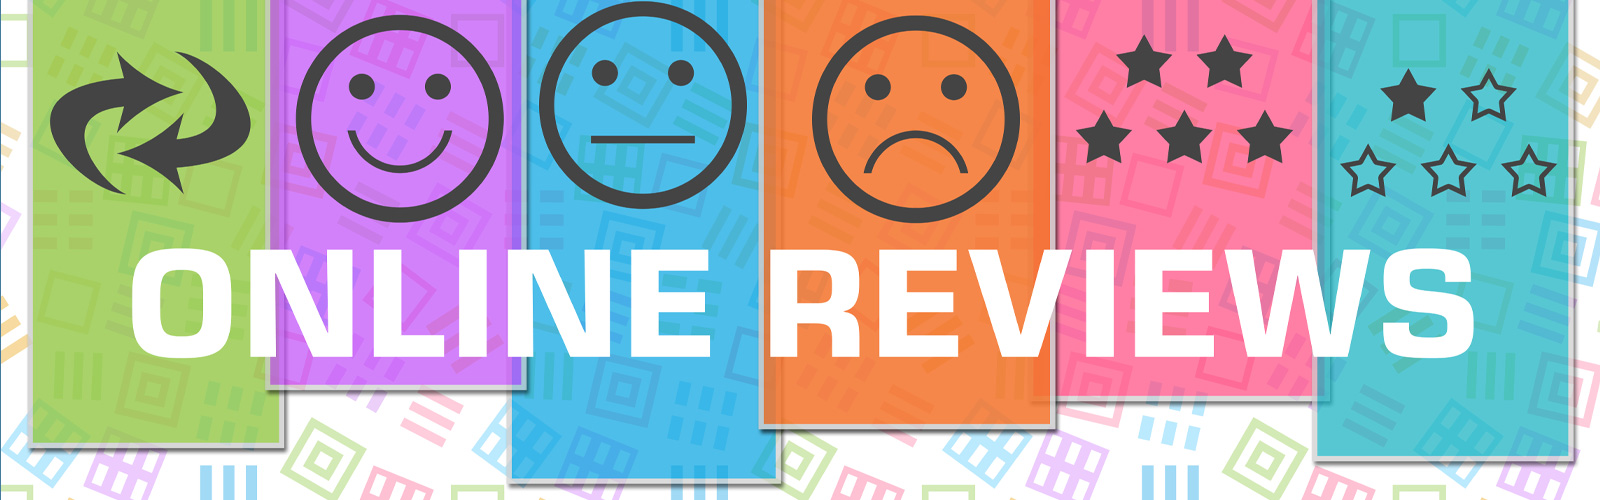 HIPAA and Online Reviews: Balancing Privacy and Transparency